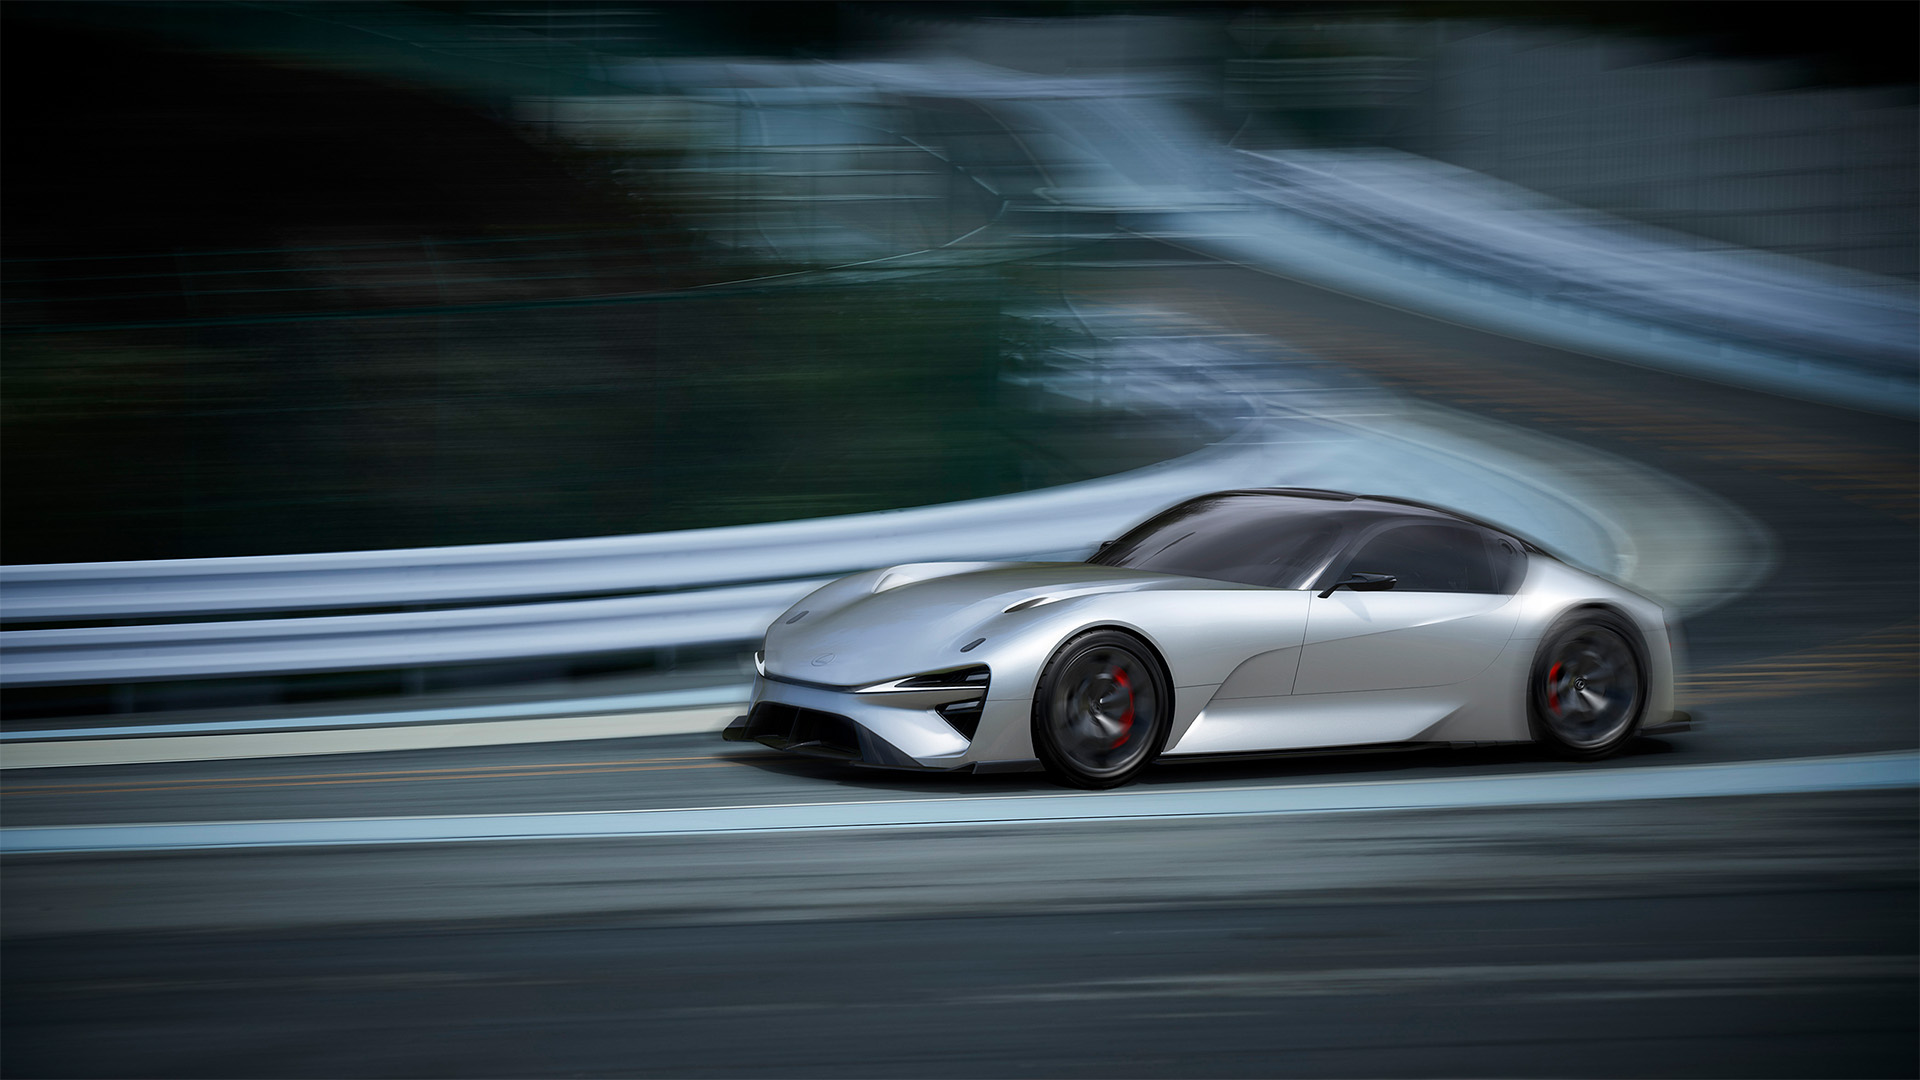 The Lexus Electrified Sport Concept driving on a race track